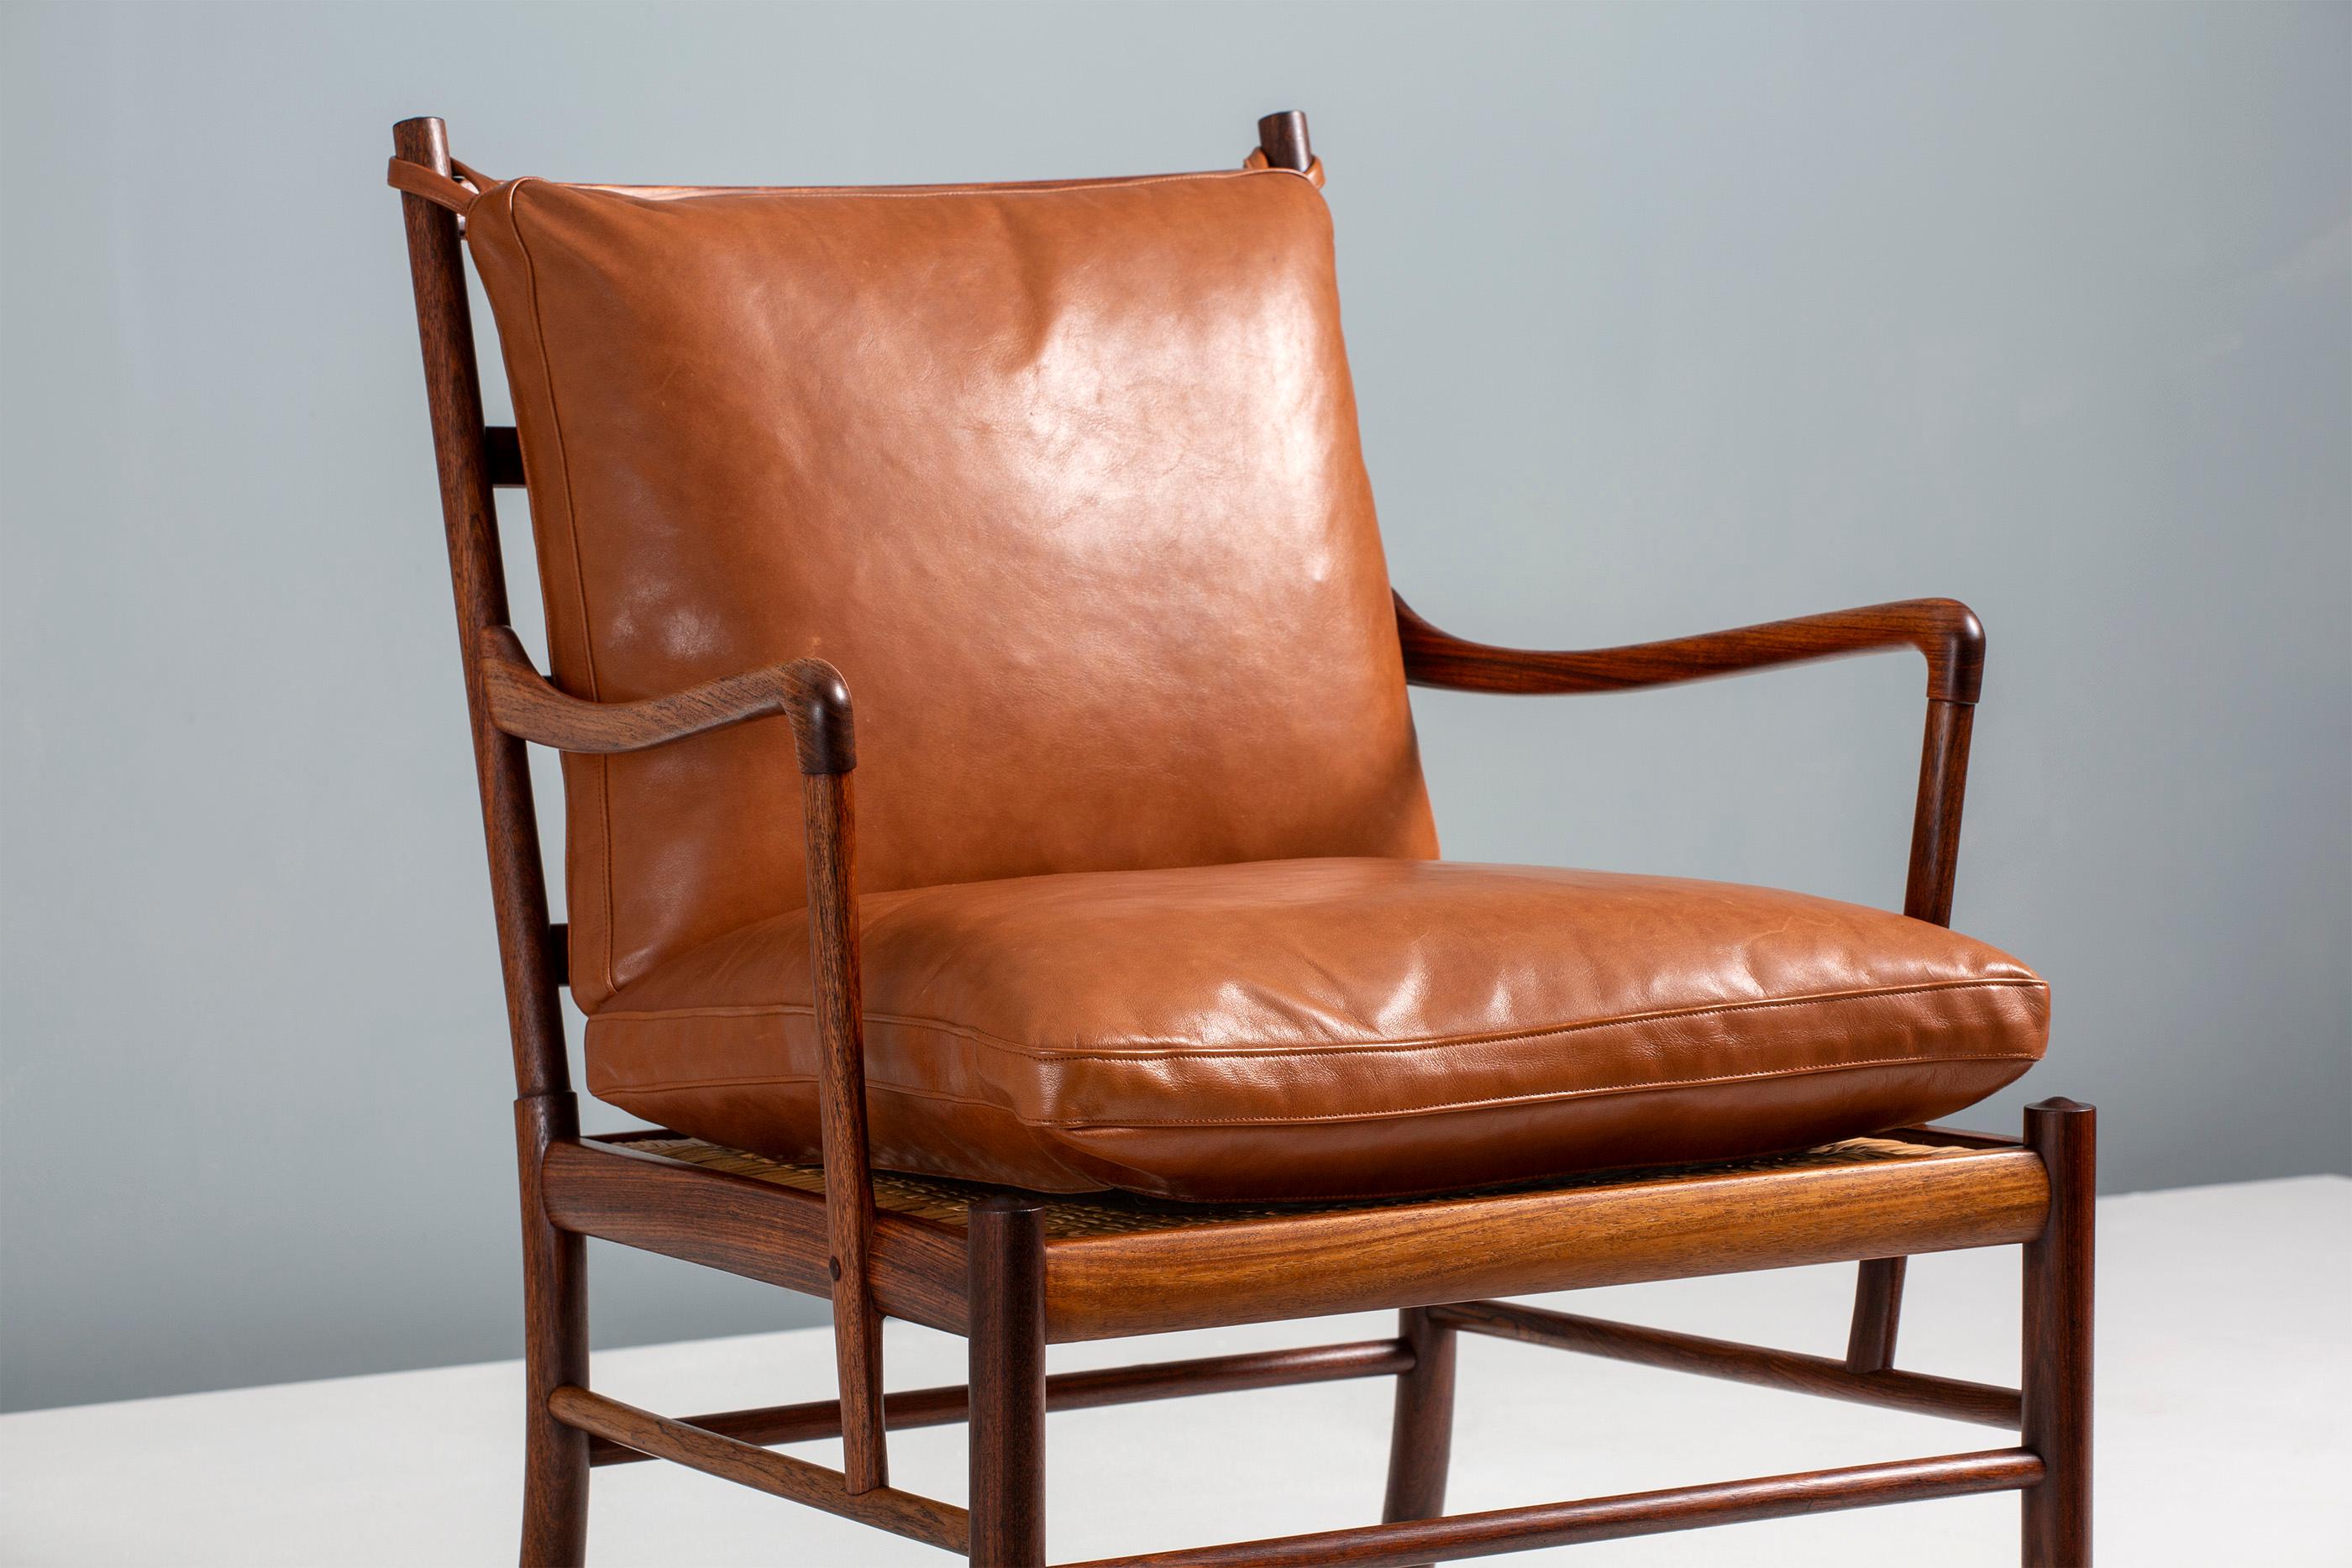 Ole Wanscher

PJ-149 Colonial Chair, 1949

Rosewood frame with original woven rattan cane seat. Produced by Poul Jeppesen in Denmark, c1950s. The original feather cushions have been covered in new cognac brown aniline leather.